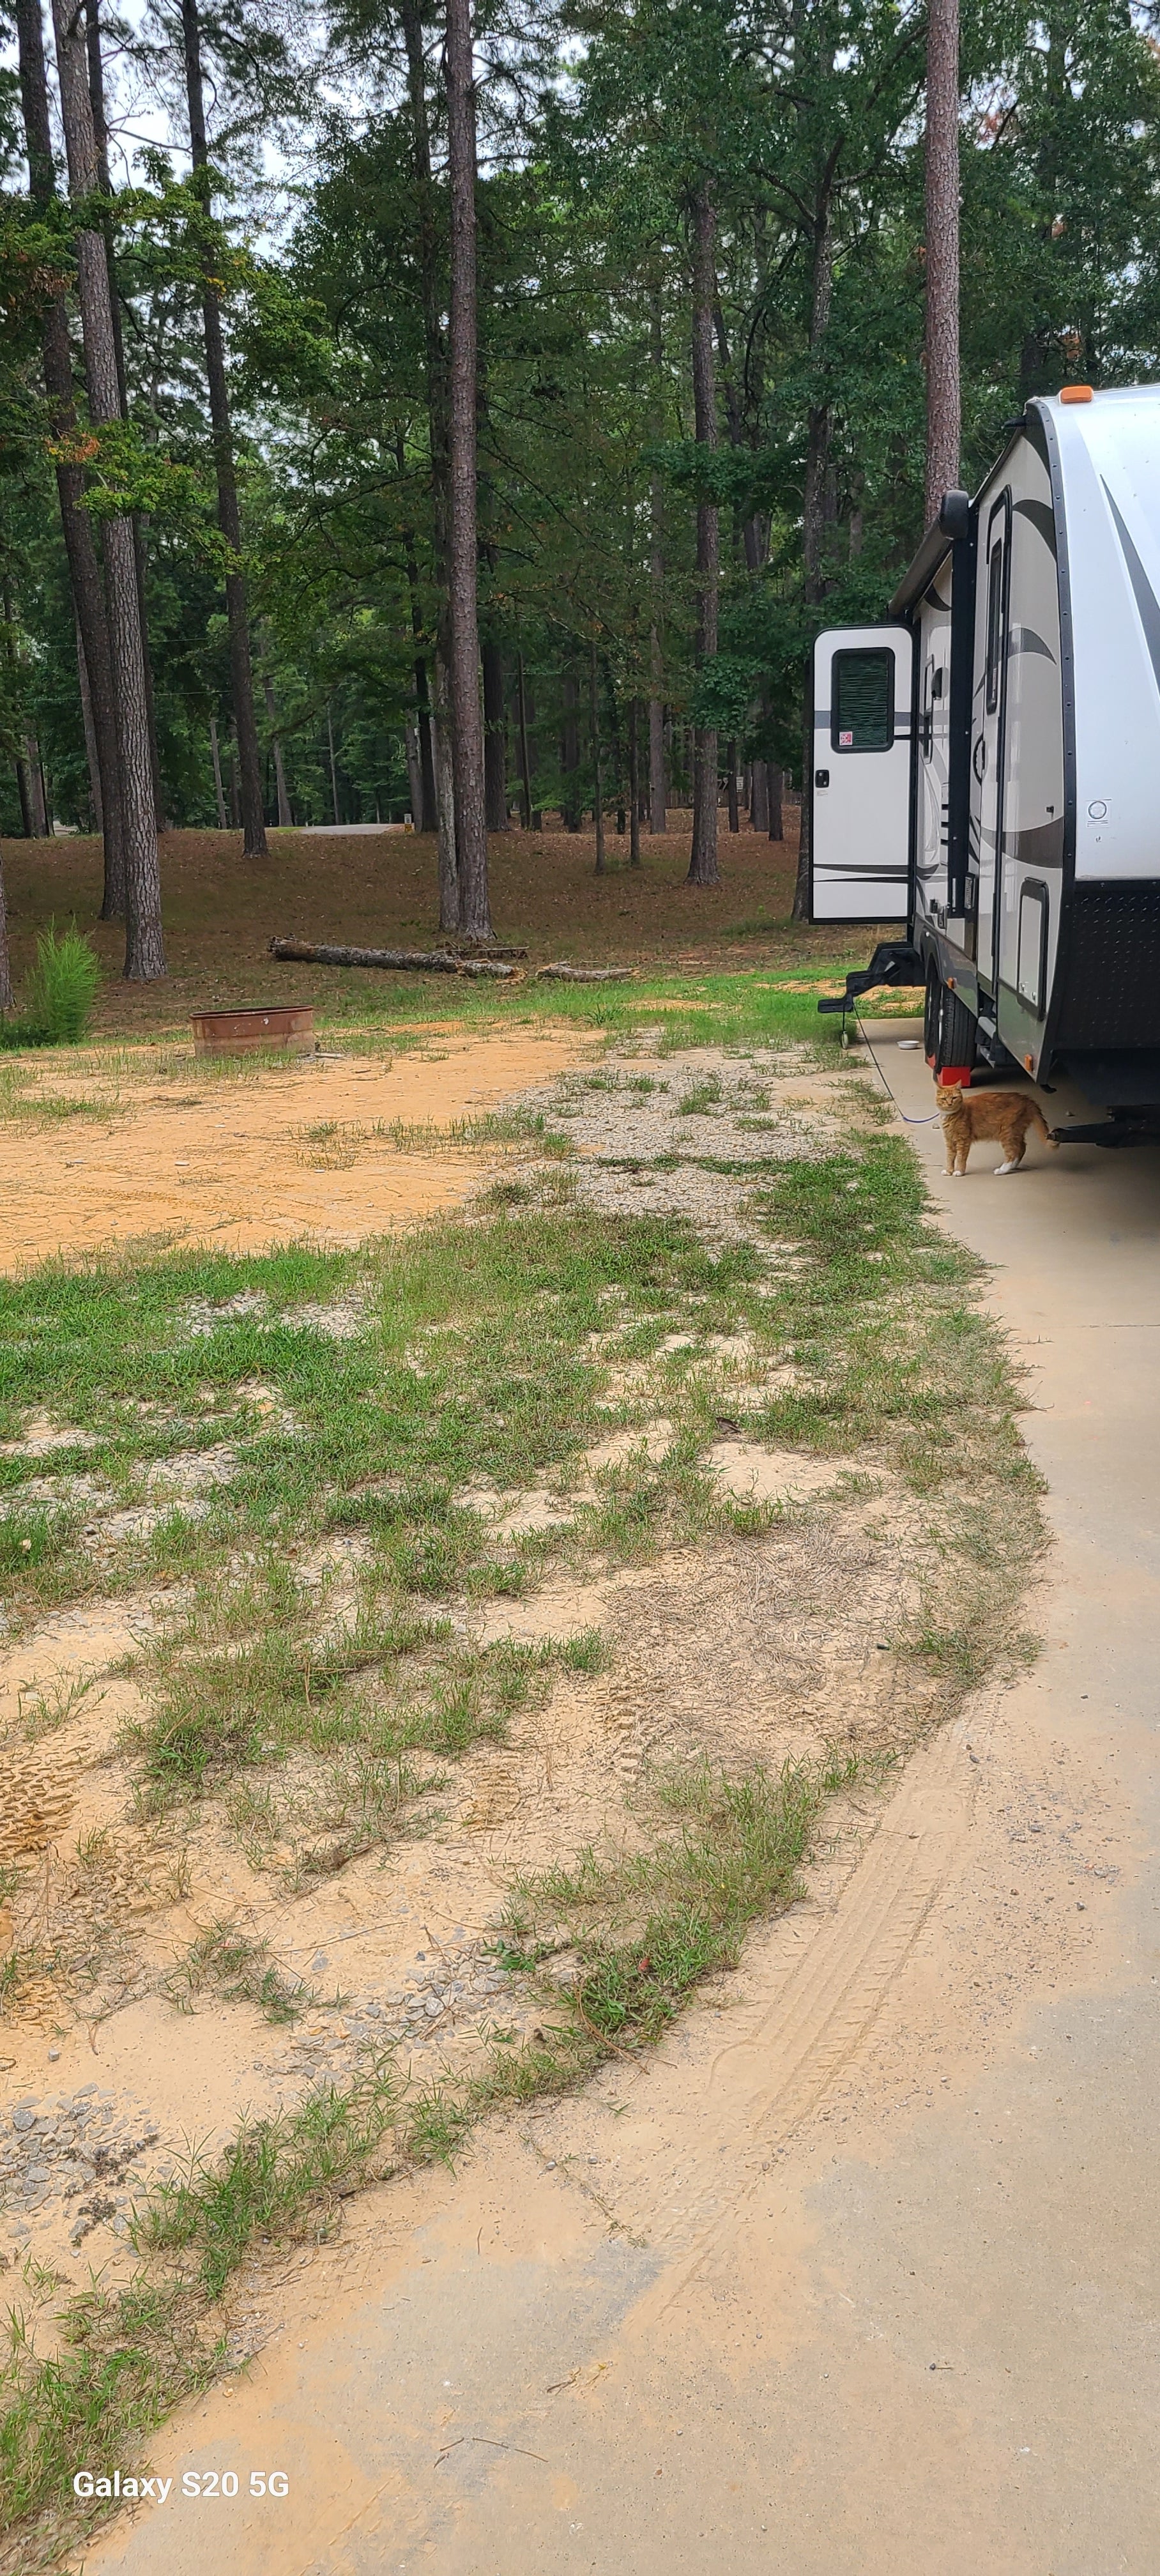 Camper submitted image from Indian Creek Recreation Area Best Camping Spot - 1